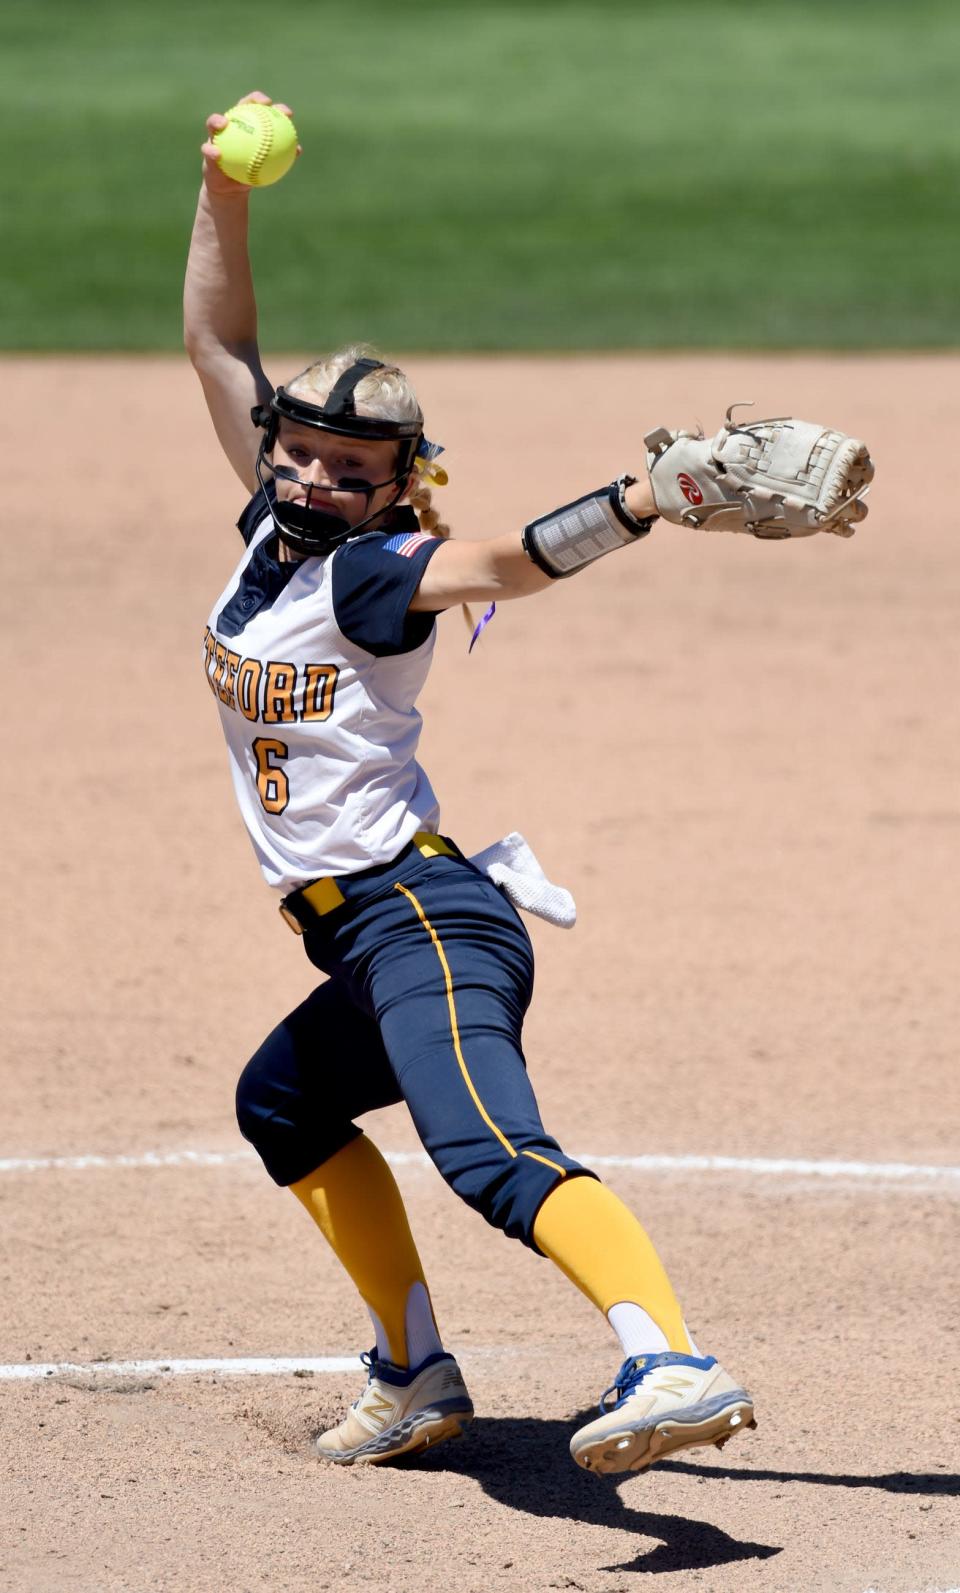 Unity Nelson of Whiteford sets to deliver a pitch against Mt. Pleasant Sacred Heart in the Division 4 state semifinals Friday, June 17, 2022 at Michigan State University. Nelson dominated to lead the Bobcats to a mercy win 10-0.